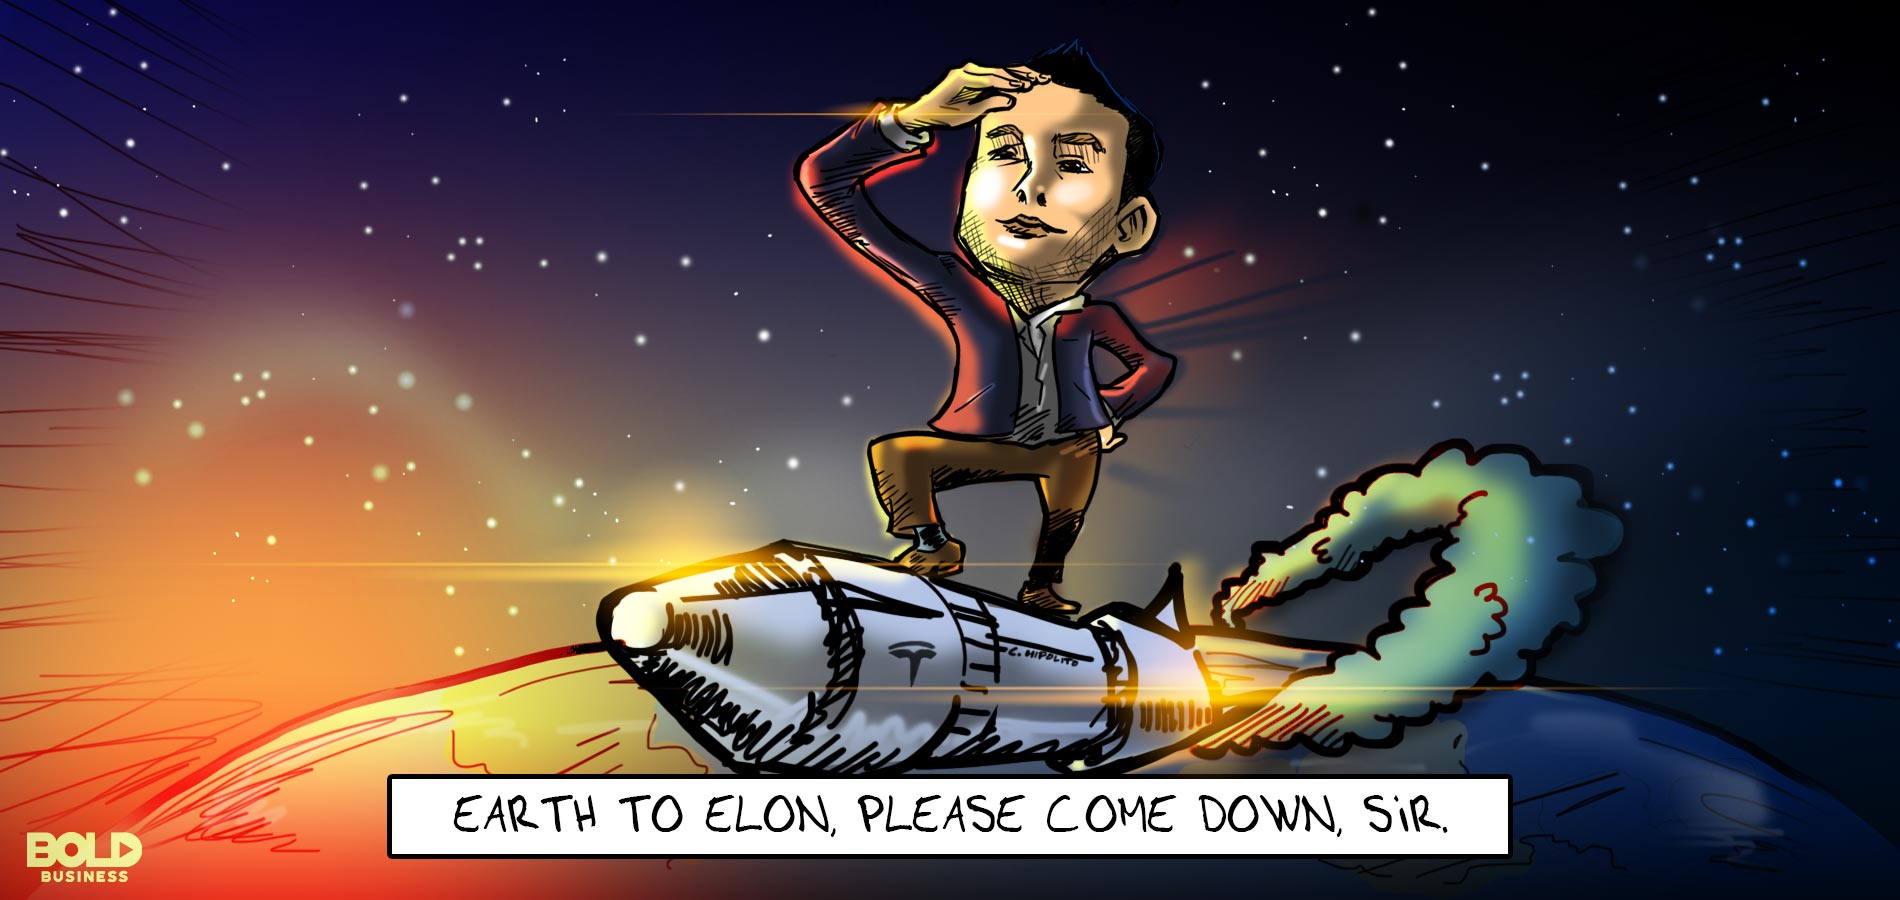 cartoon of Elon Musk riding a rocket above the Earth's atmosphere, depicting Elon Musk's leadership turning from bold to bad